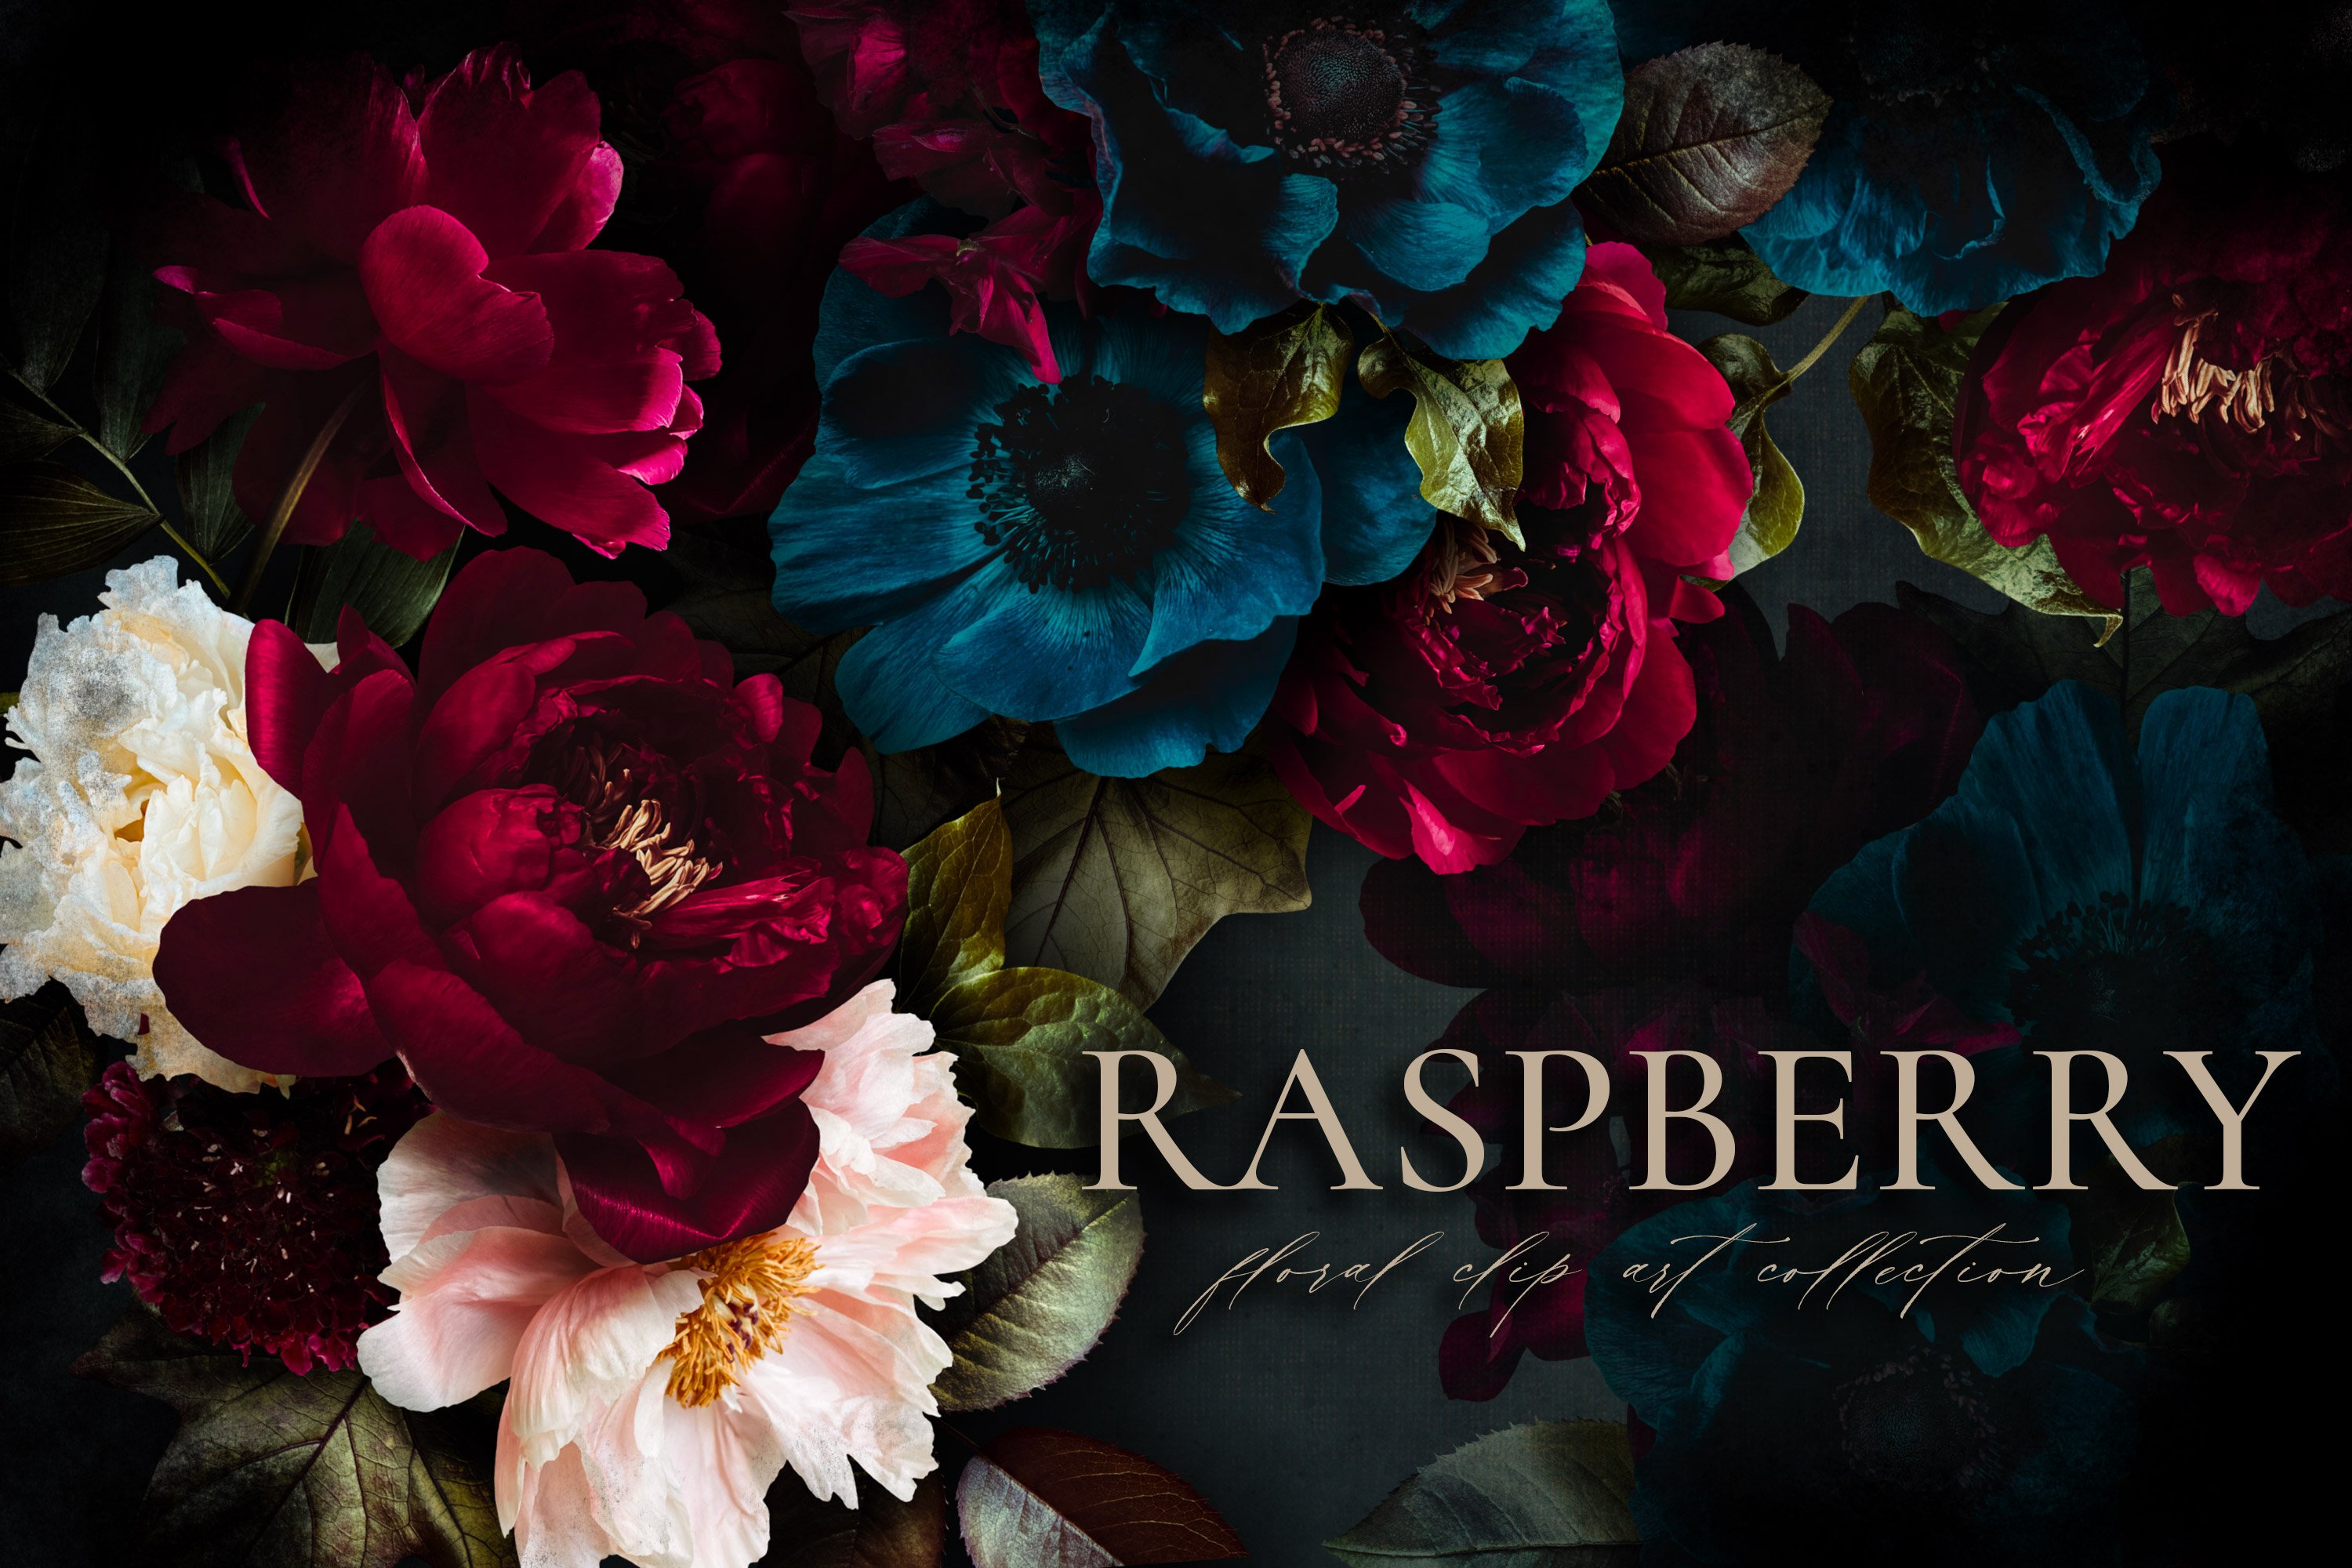 Raspberry Floral Clip Art Collection cover image.